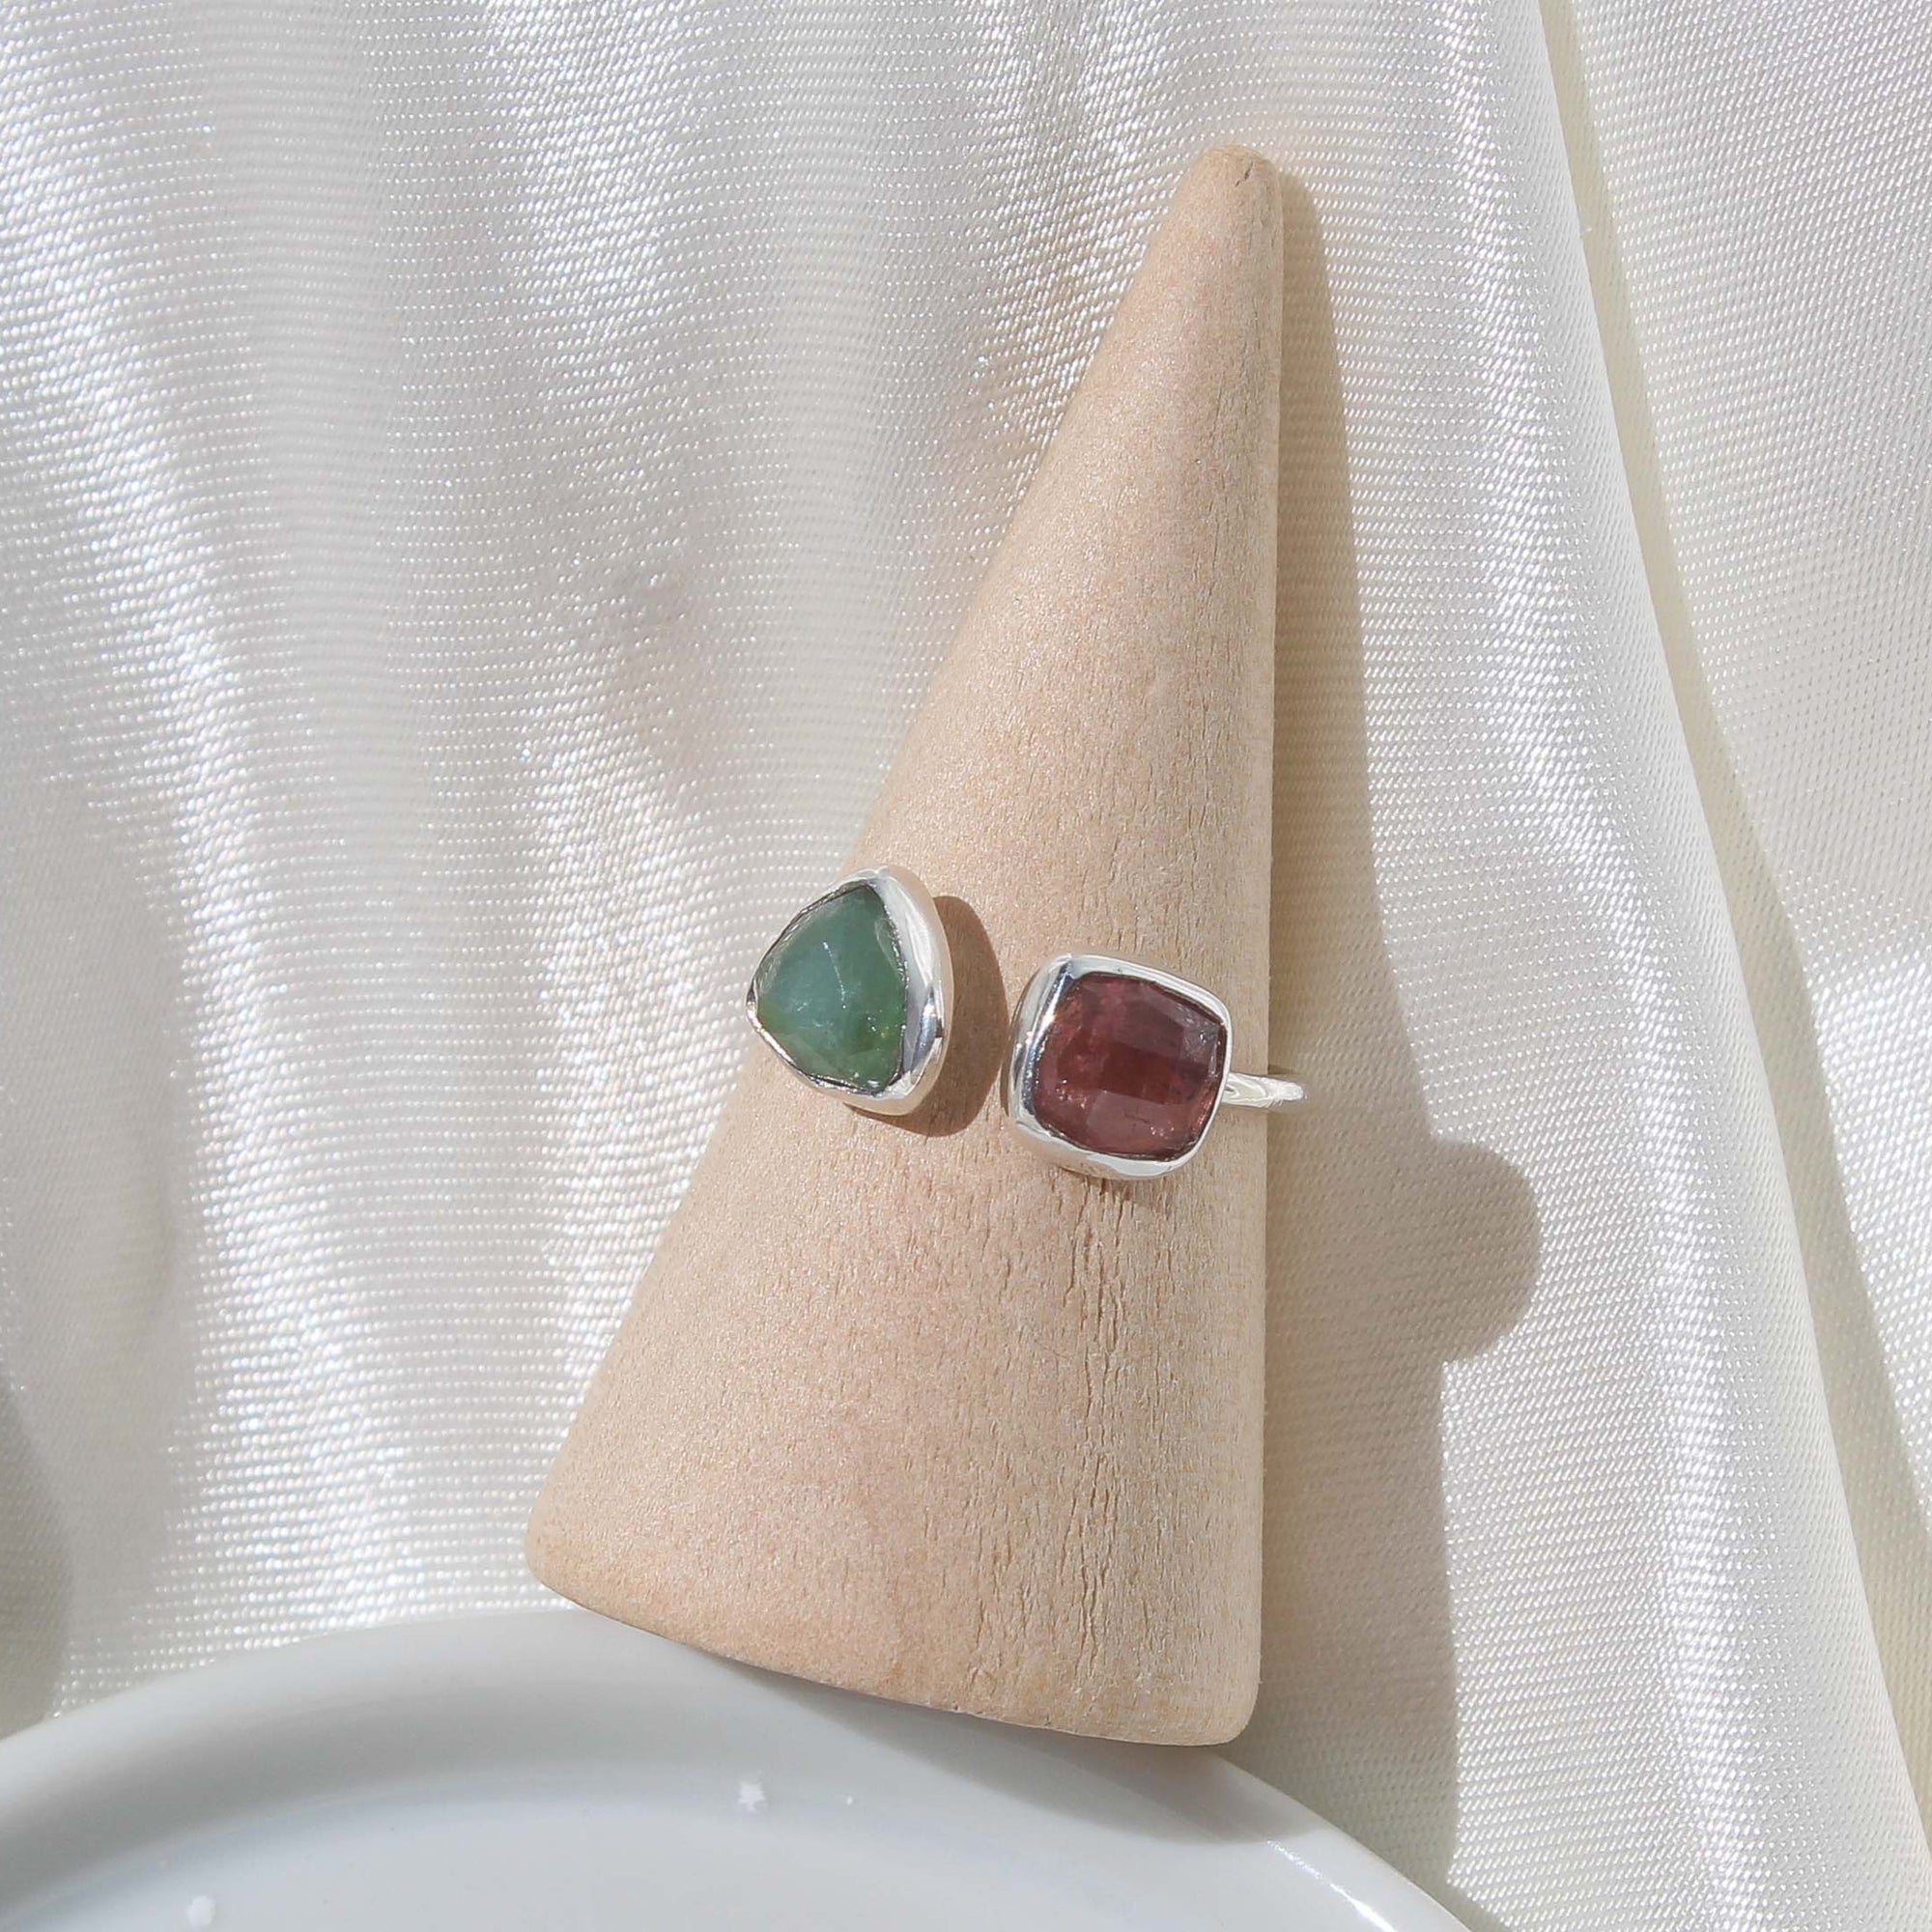 925 sterling silver adjustable ring with a simple band, a faceted triangular shaped green tourmaline on the left side and a faceted square shaped pink tourmaline stone on the right side.